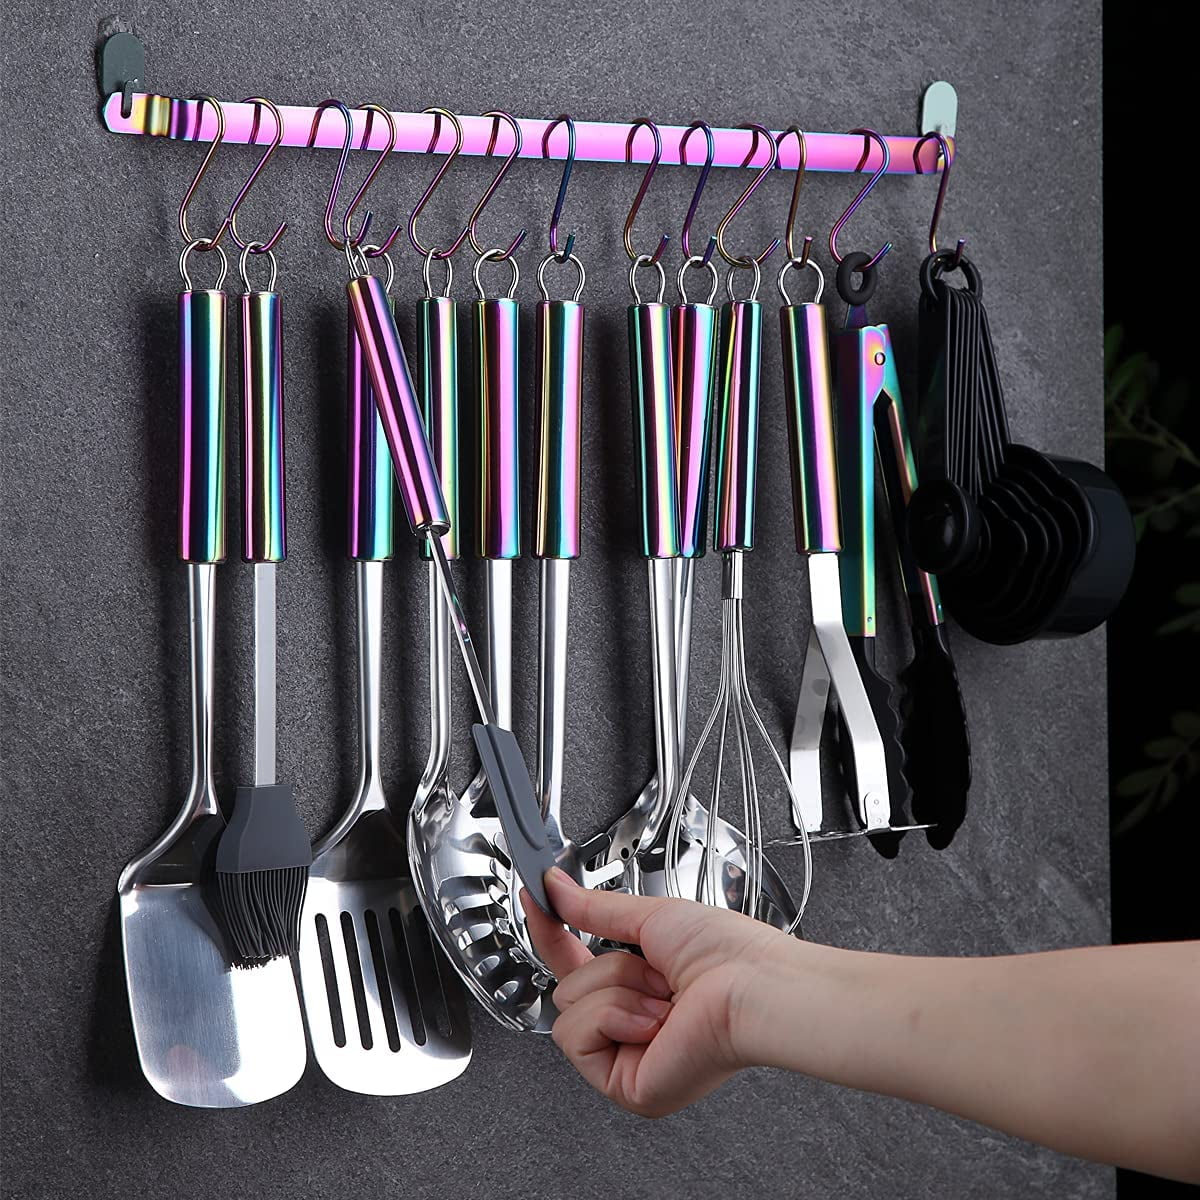 Reanea Gold Cooking Utensils Set Stainless Steel 37 Pieces Kitchen Utensils Set Kitchen Tools Gadgets Set with Hooks, Size: 17.01 x 5.28 x 4.92